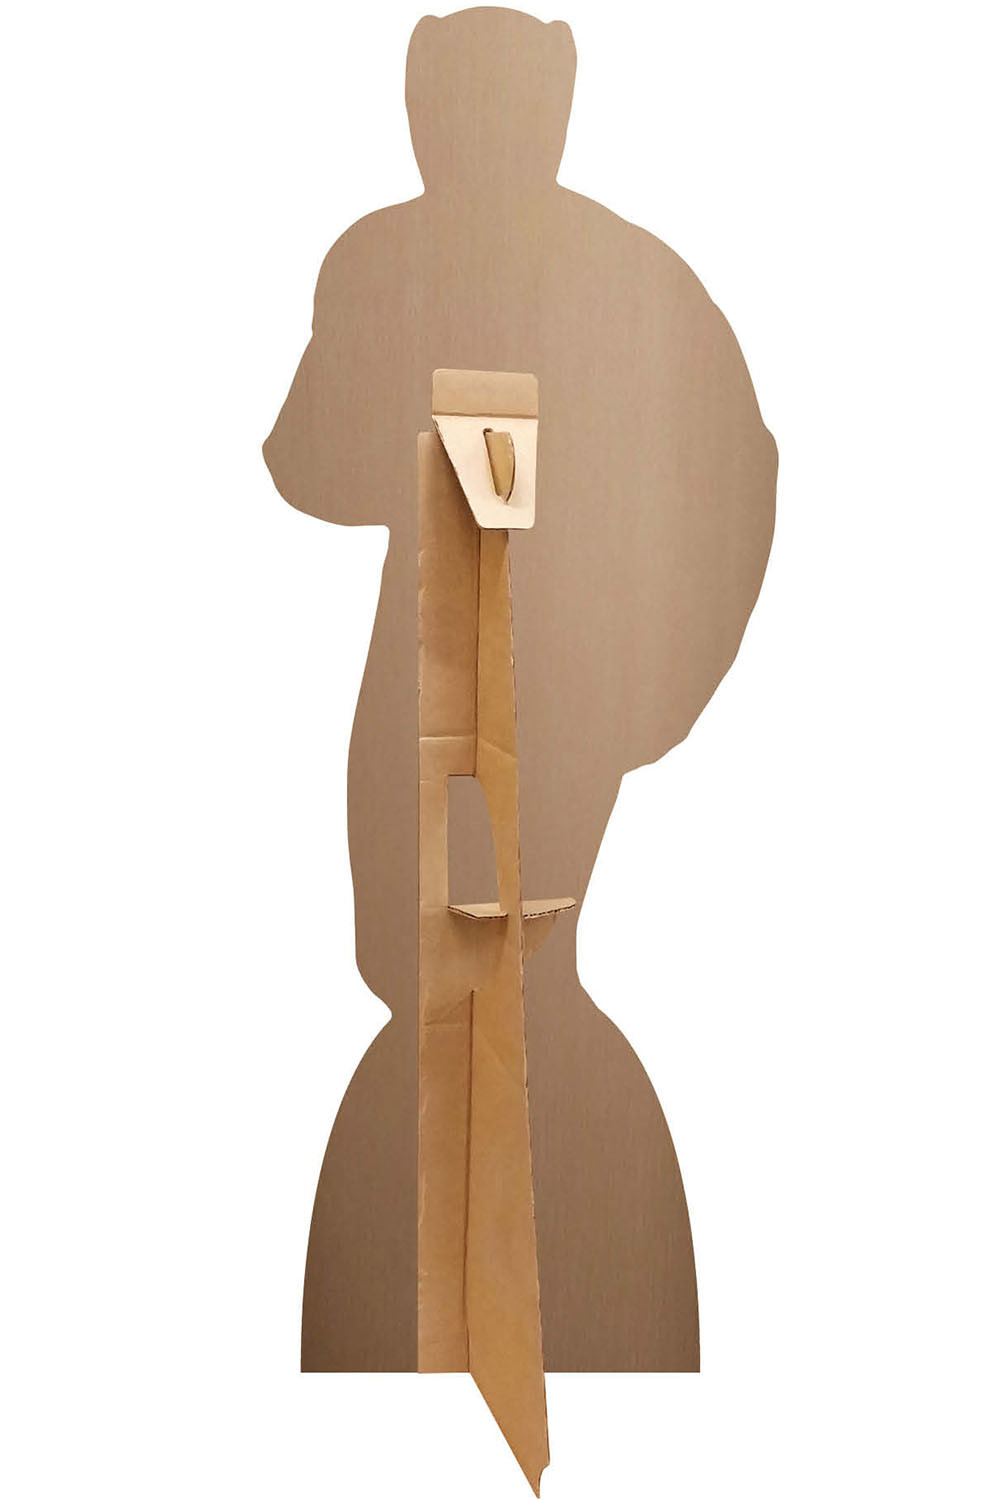 Miniature wooden mannequin in a thinking pose Stock Photo